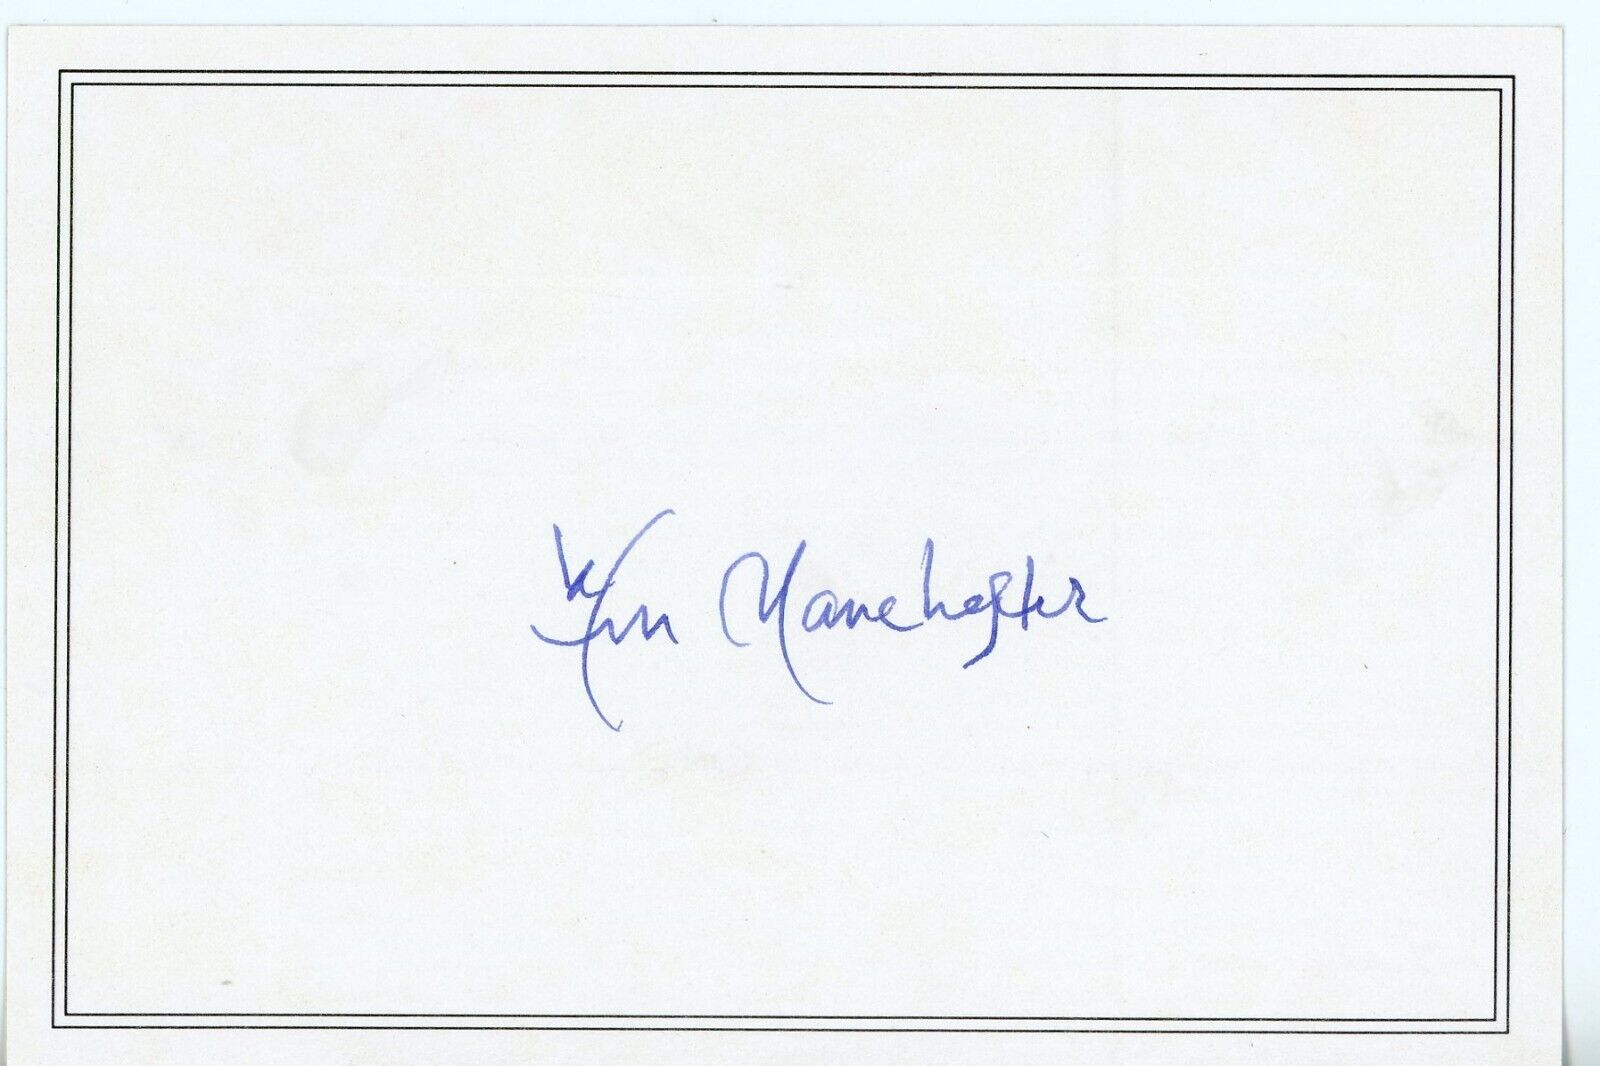 Famed Historian &Author William Manchester & his autograph